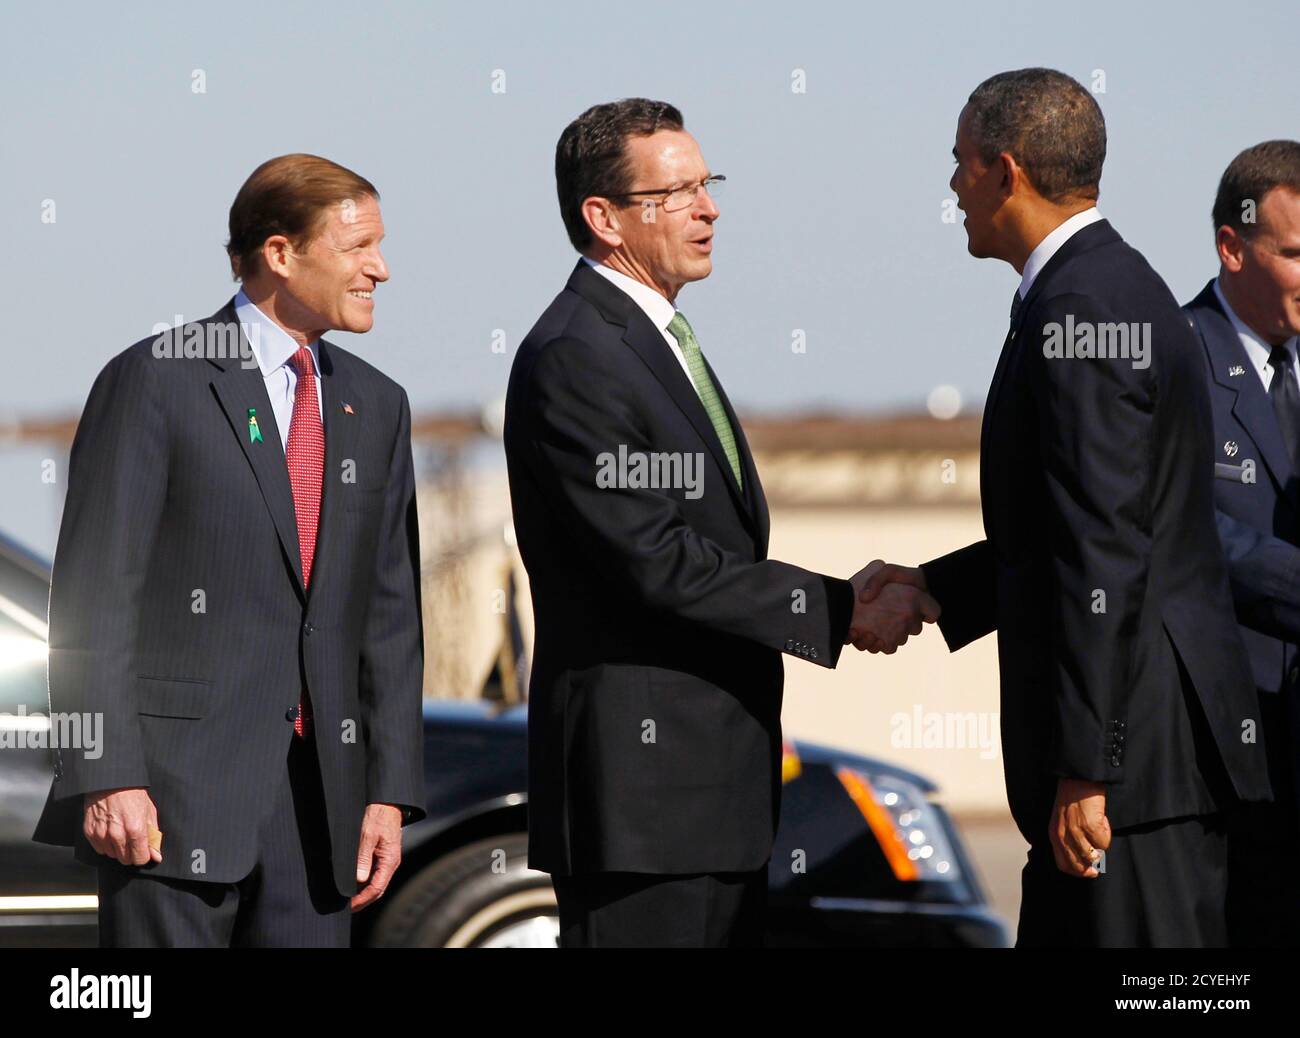 U.S. President Barack Obama (R) is greeted by Connecticut Governor Dannel Malloy (C) and Senator Richard Blumenthal upon his arrival at Bradley Air National Guard Base in Hartford, Connecticut, April 8, 2013. Obama is in Connecticut to deliver remarks on measures to reduce gun violence, at the University of Hartford.  REUTERS/Jason Reed     (UNITED STATES - Tags: POLITICS) Stock Photo